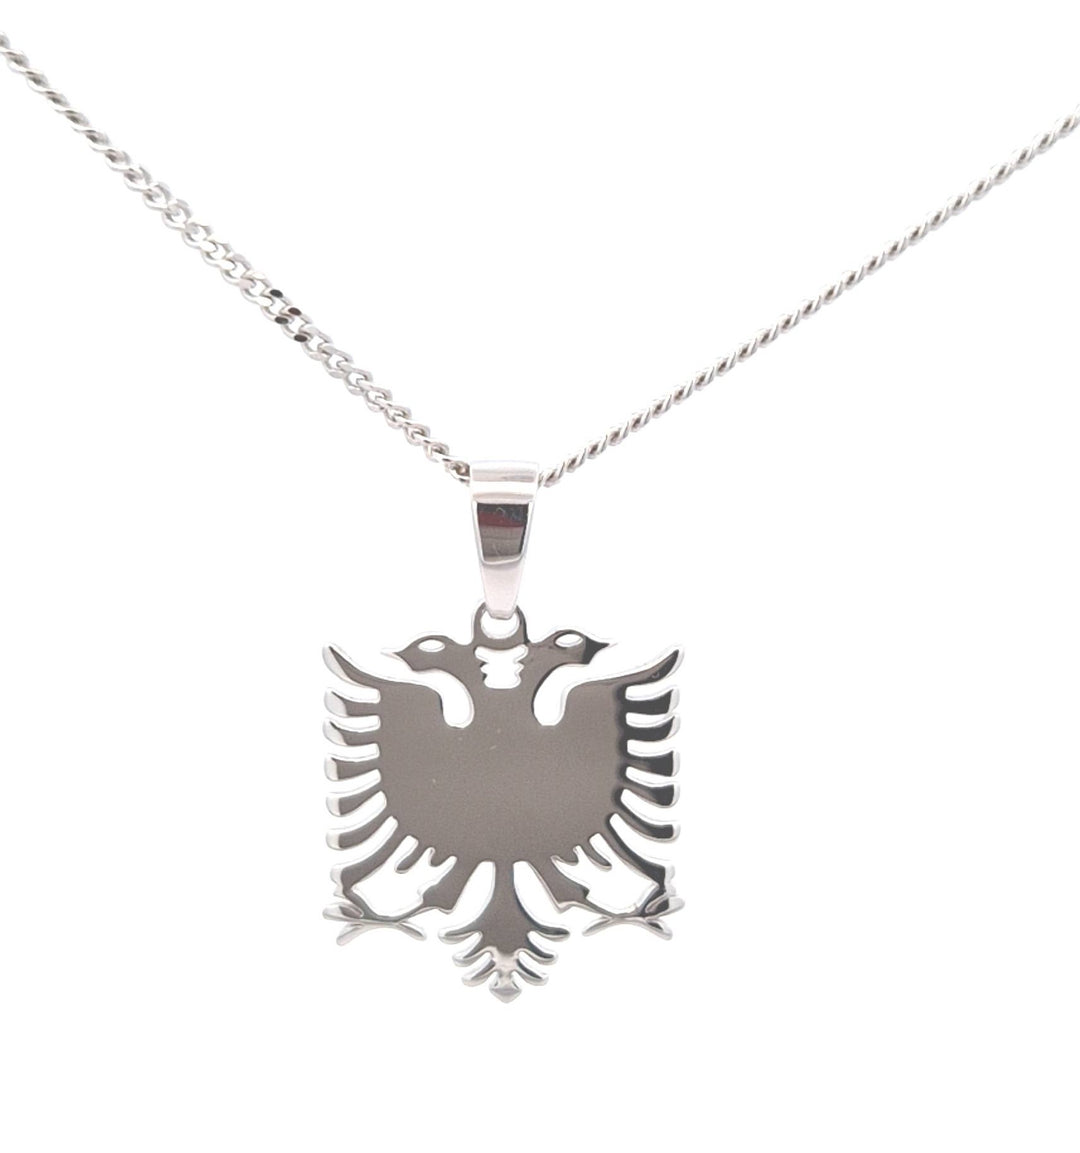 STERLING SILVER ALBANIAN EAGLE PENDANT AND CHAIN